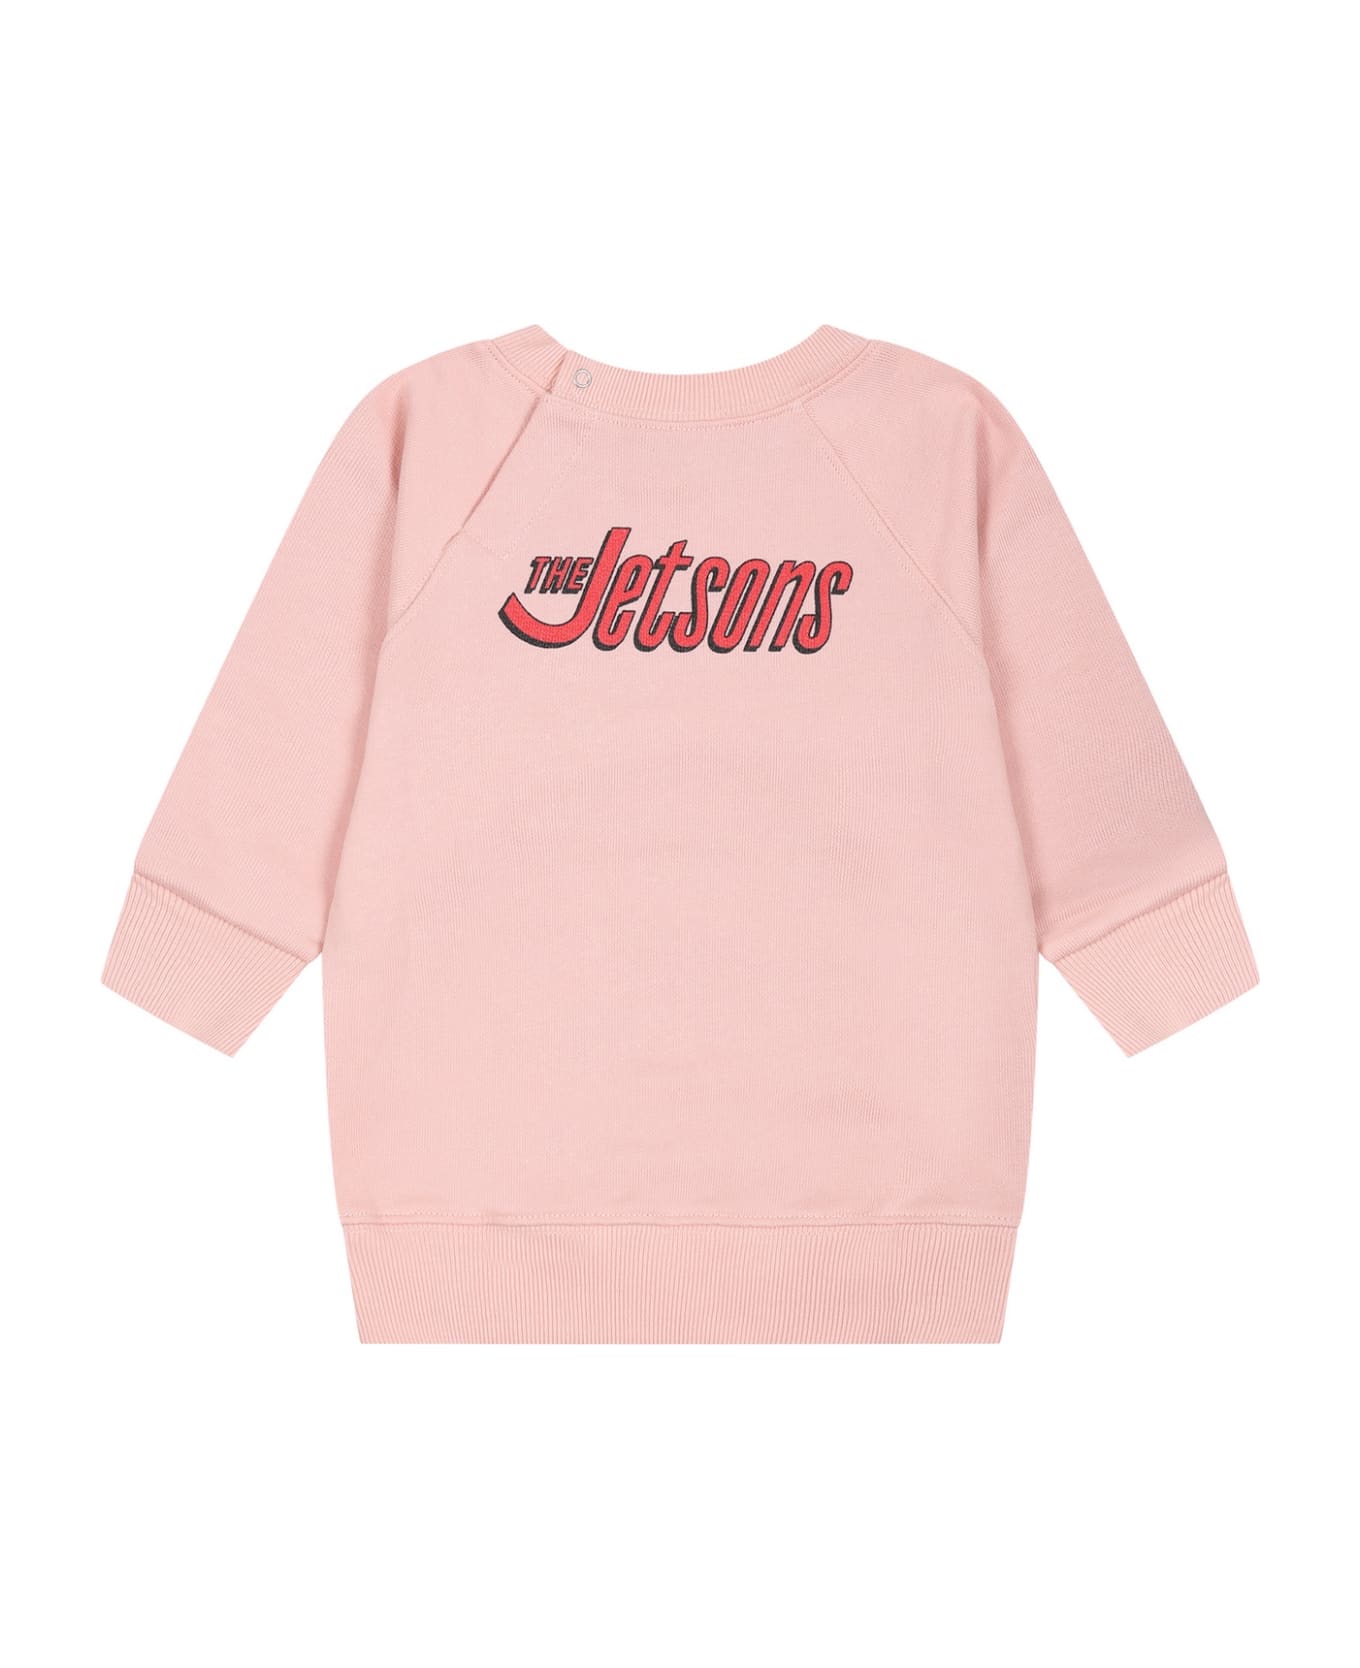 Gucci Pink Sweatshirt For Baby Girl With Print And Logo - Pink